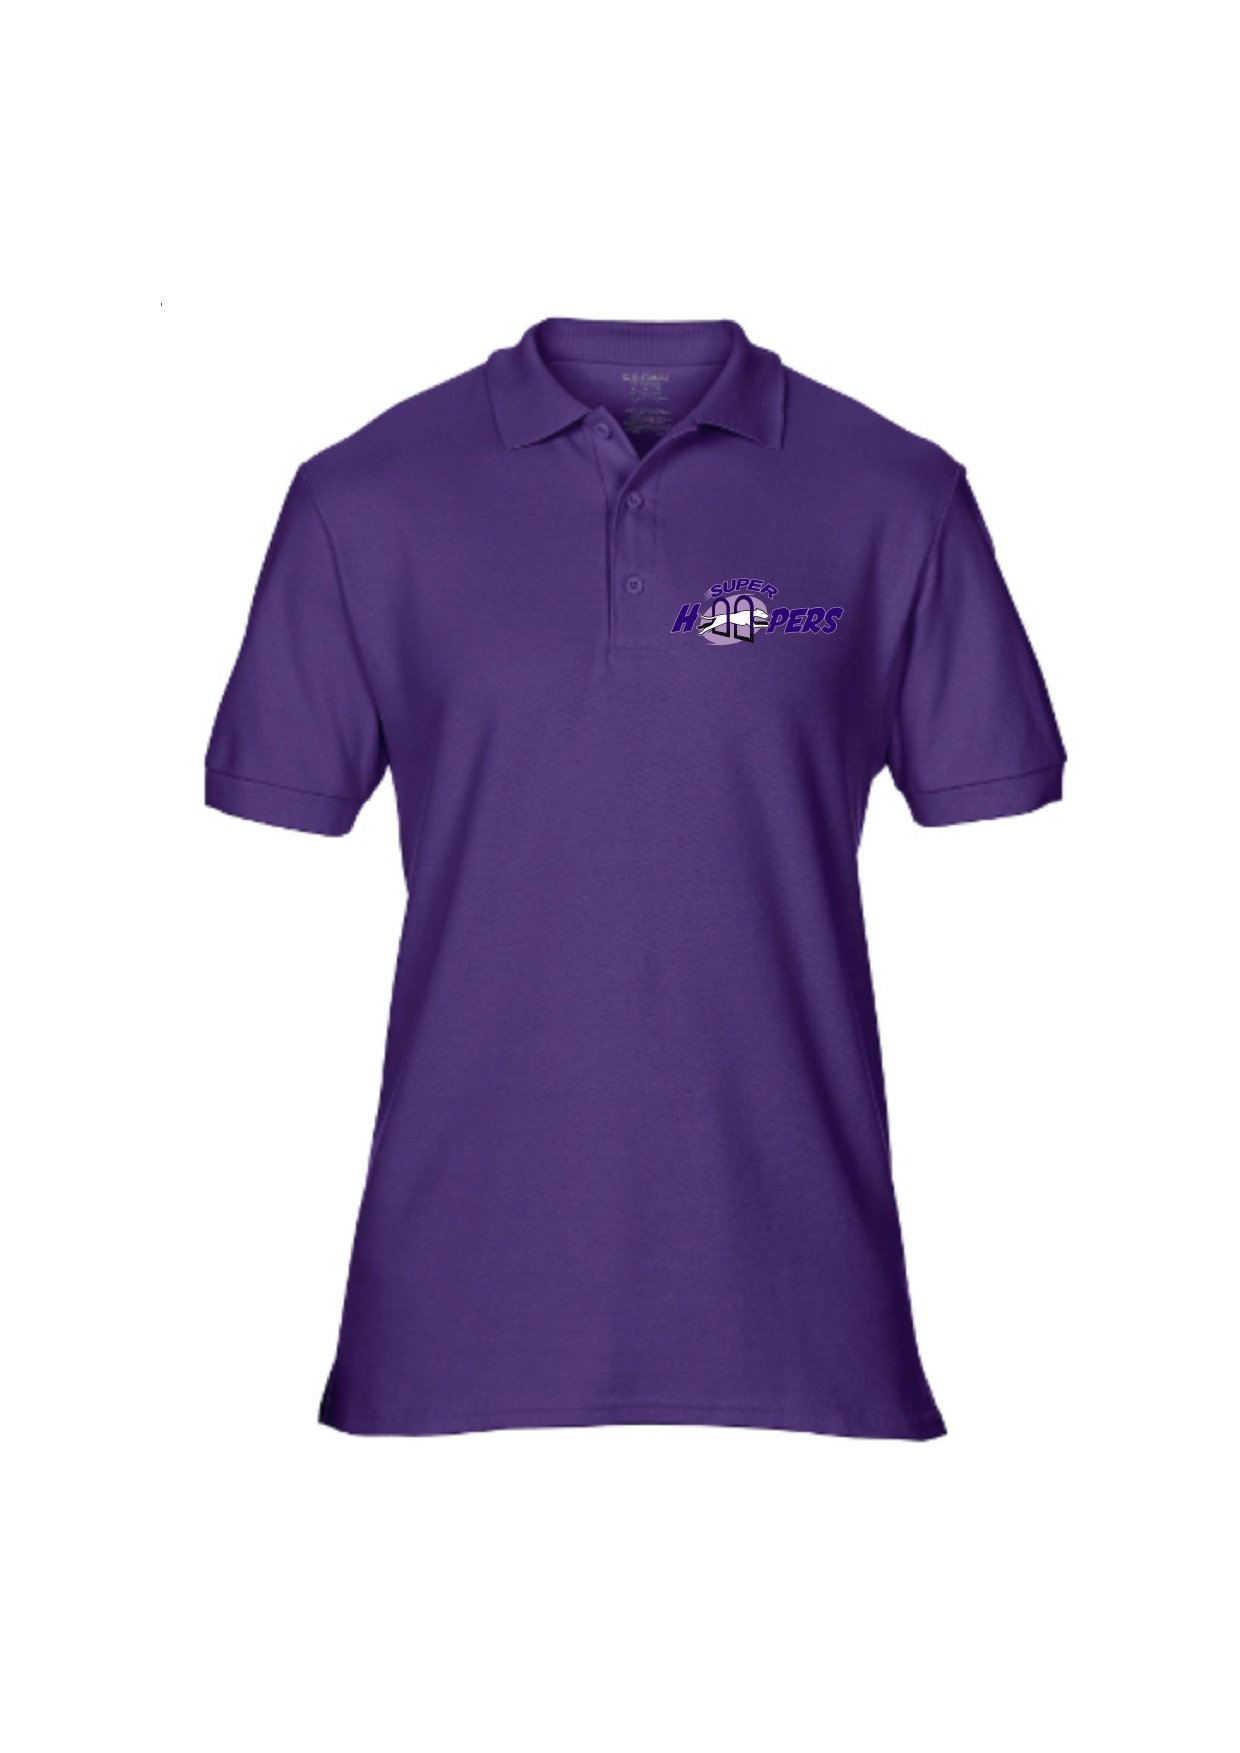 Super Hoopers Polo shirt Large – Purple – Pooch